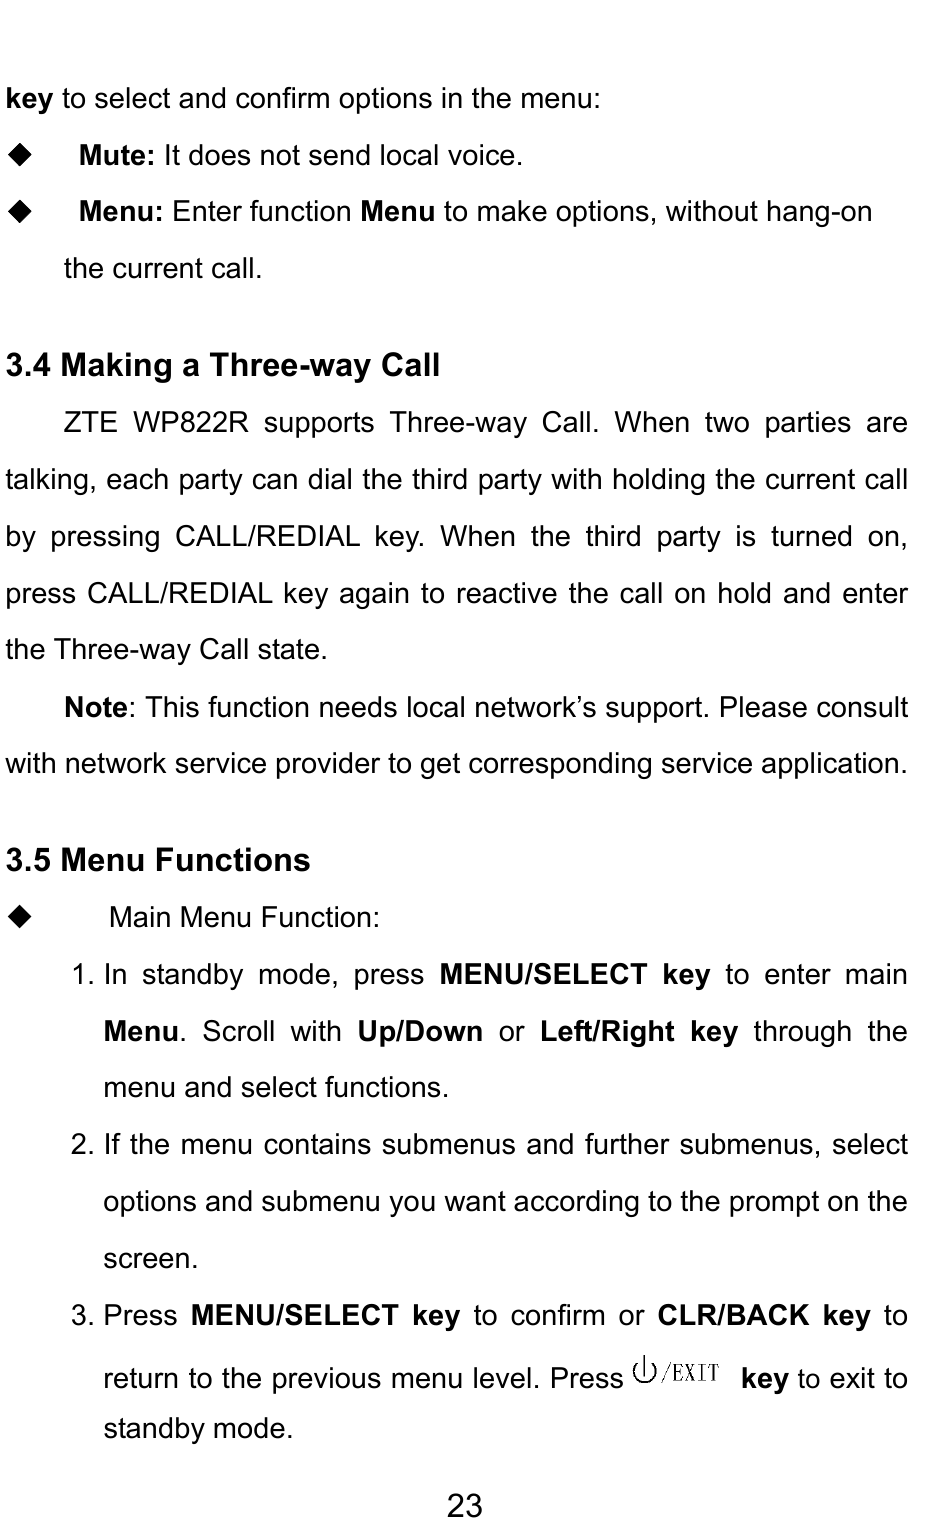                                     23key to select and confirm options in the menu:   ◆  Mute: It does not send local voice.   ◆  Menu: Enter function Menu to make options, without hang-on the current call.   3.4 Making a Three-way Call ZTE WP822R supports Three-way Call. When two parties are talking, each party can dial the third party with holding the current call by pressing CALL/REDIAL key. When the third party is turned on, press CALL/REDIAL key again to reactive the call on hold and enter the Three-way Call state. Note: This function needs local network’s support. Please consult with network service provider to get corresponding service application. 3.5 Menu Functions    Main Menu Function:  1. In standby mode, press MENU/SELECT key to enter main Menu. Scroll with Up/Down  or  Left/Right key through the menu and select functions. 2. If the menu contains submenus and further submenus, select options and submenu you want according to the prompt on the screen. 3. Press  MENU/SELECT key to confirm or CLR/BACK key to return to the previous menu level. Press  key to exit to standby mode. 